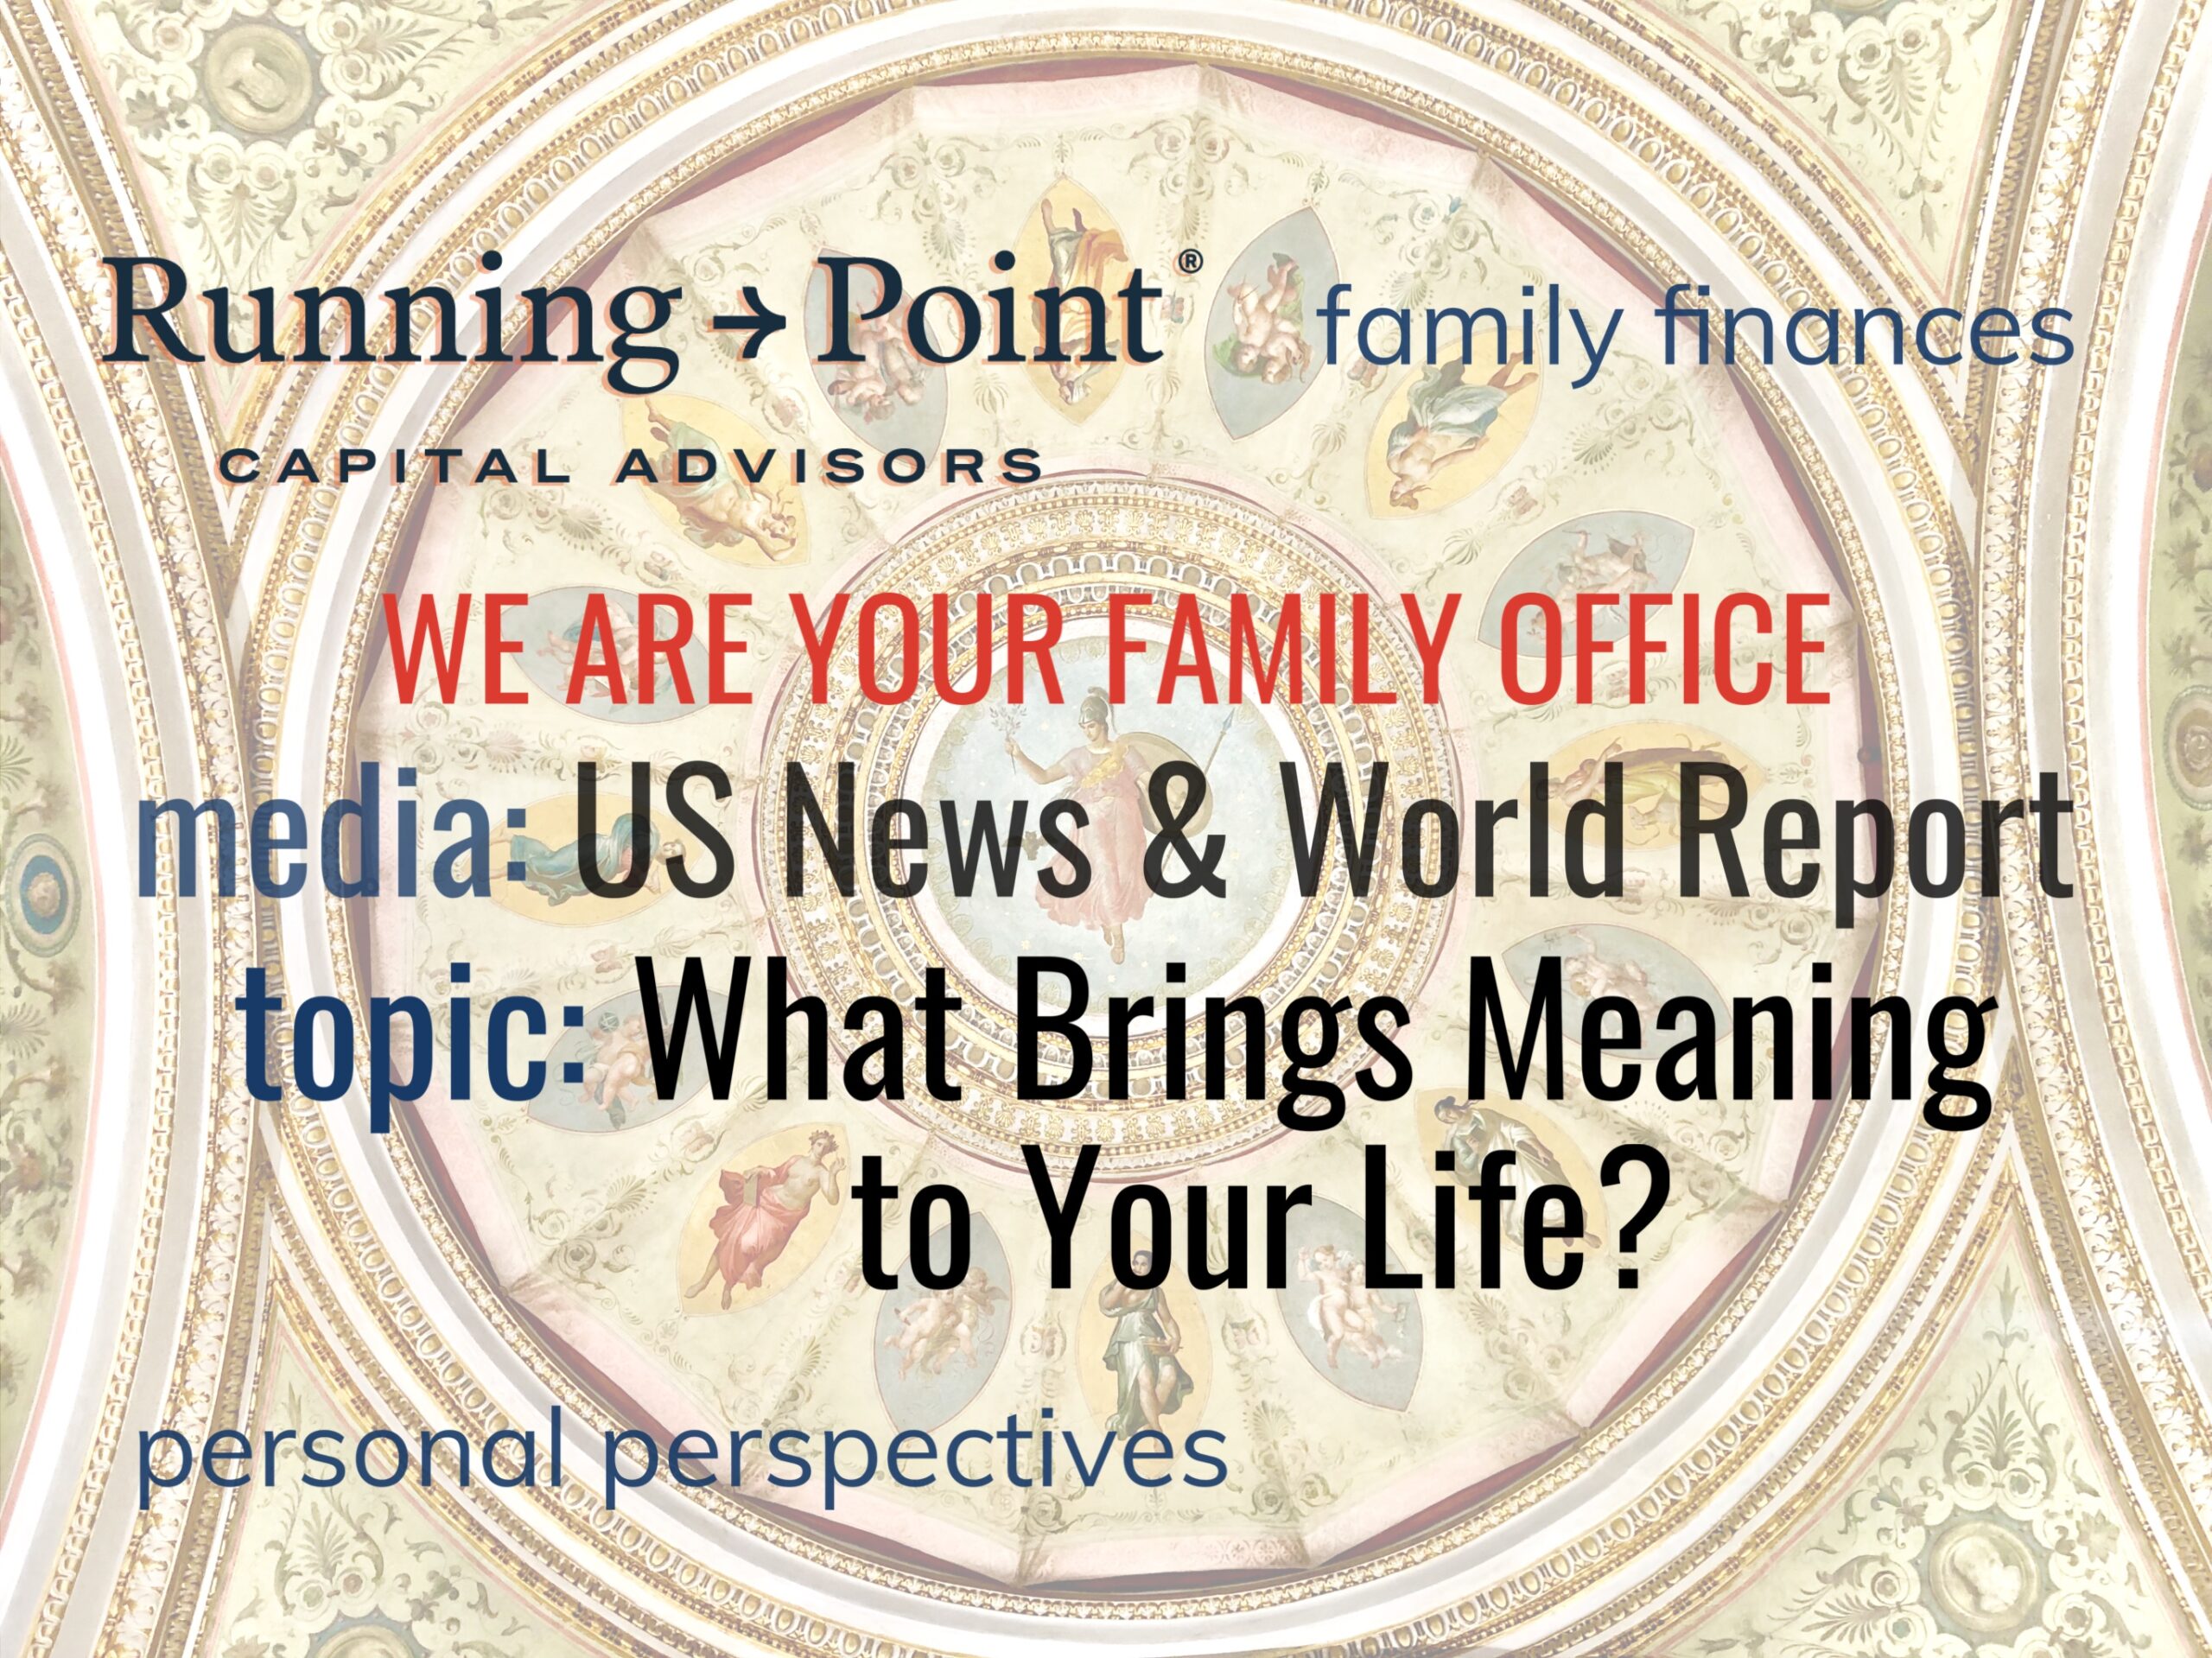 U.S. News & World Report: What brings meaning to your life?